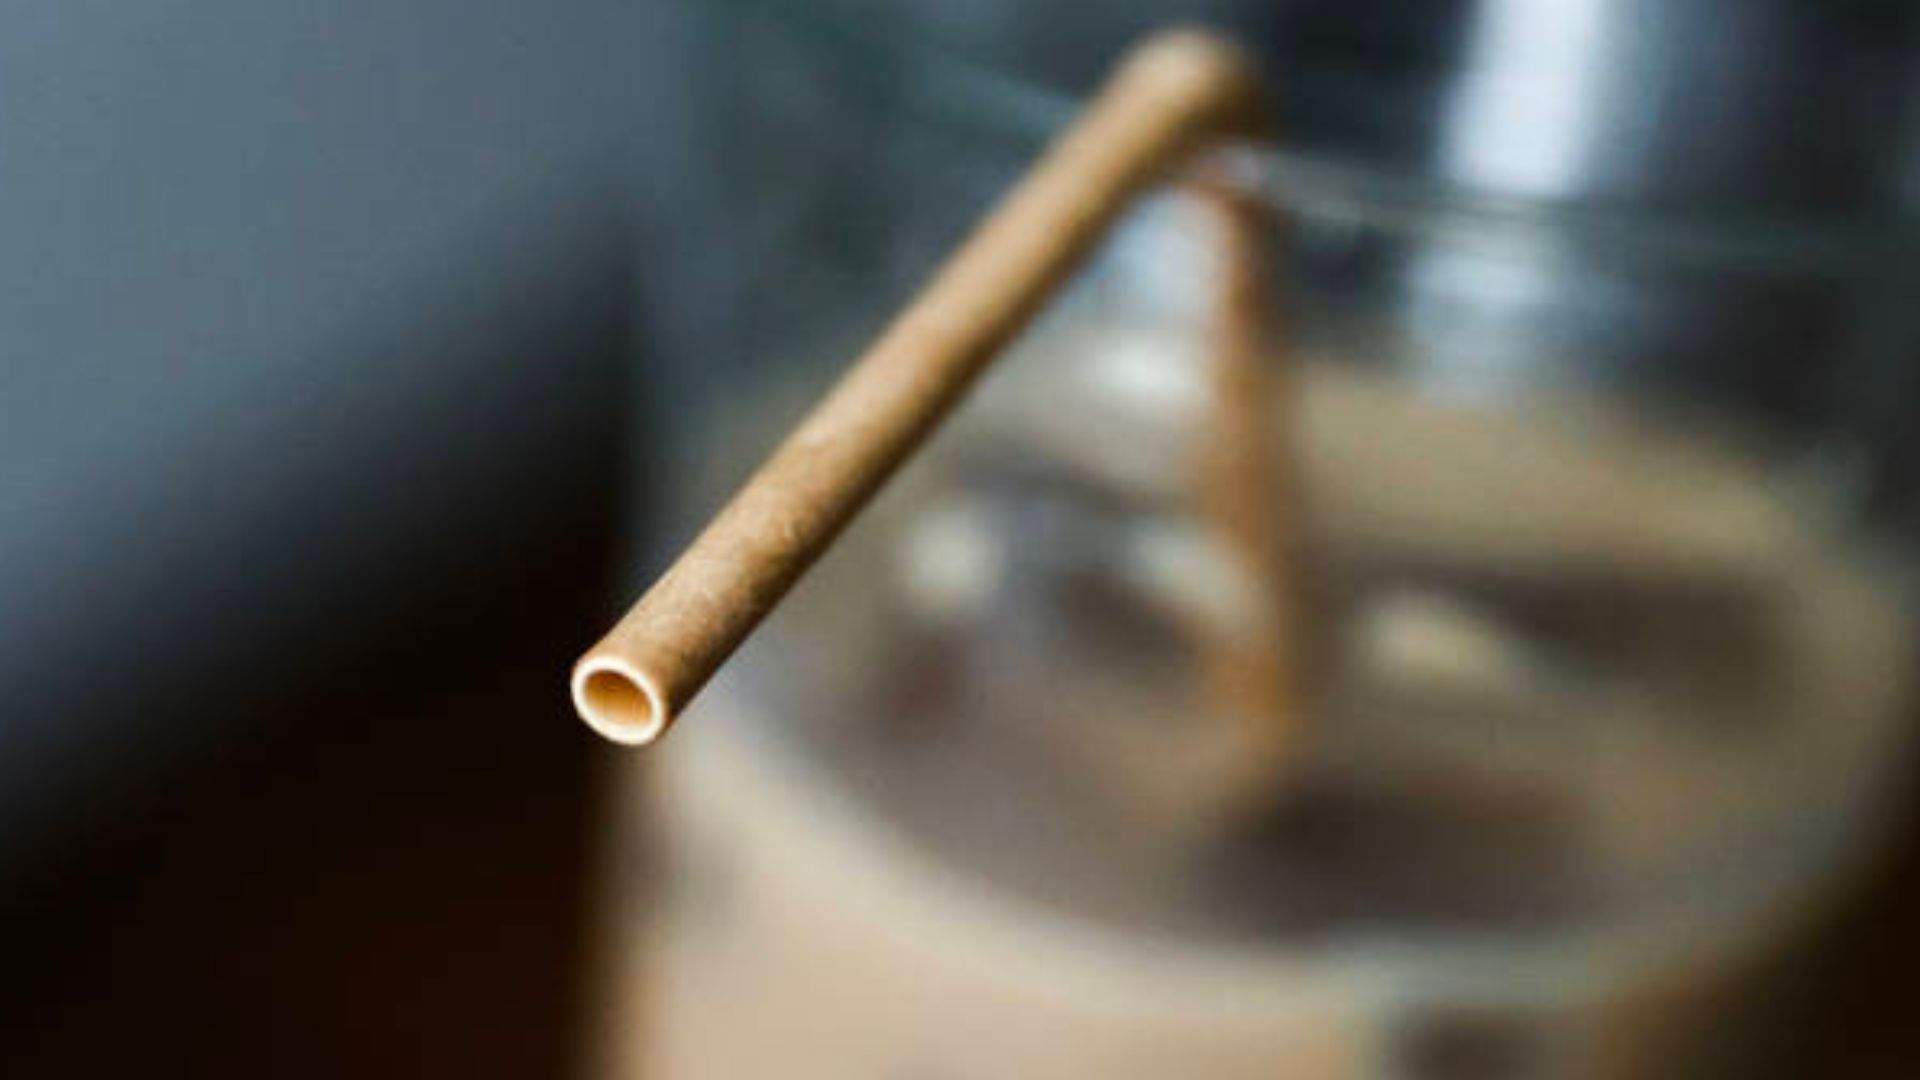 Paper straws found to be harmful for both health and the environment, reveals study.